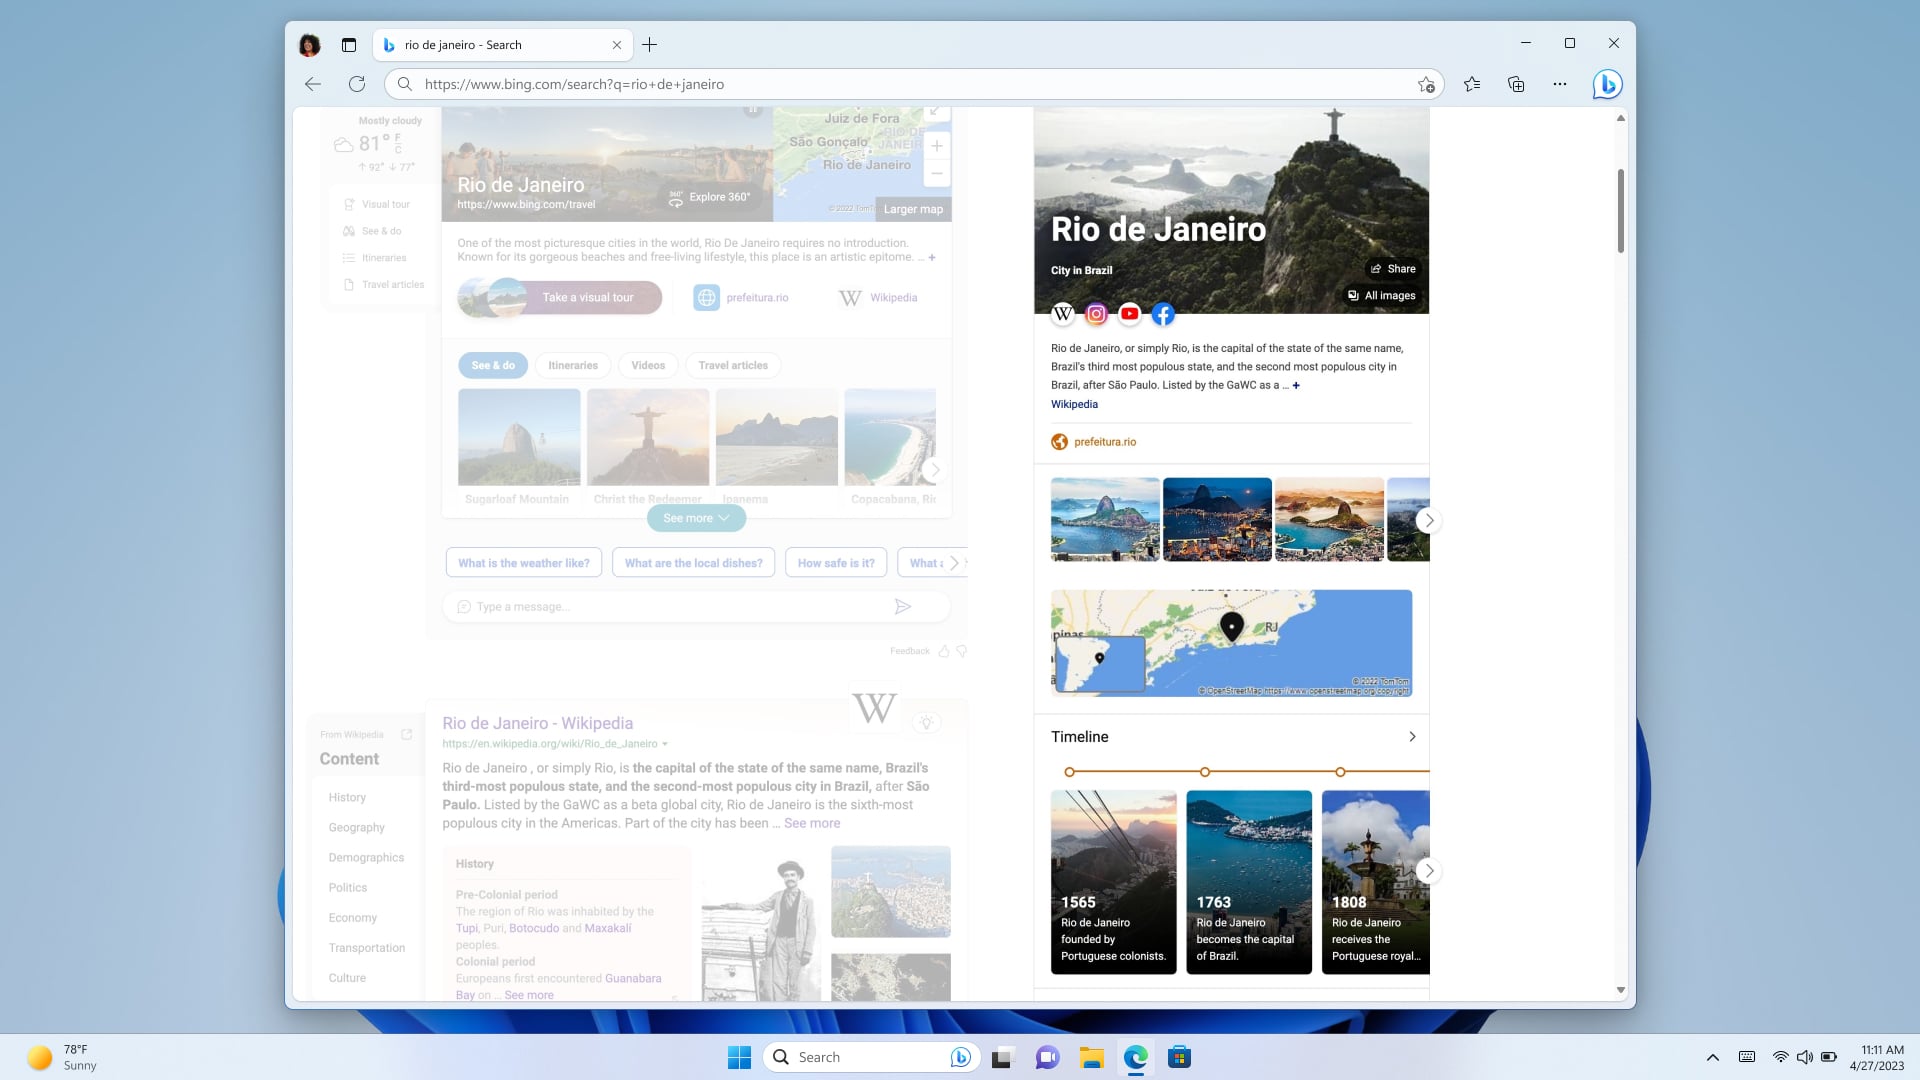 Create images with your words - Bing Image Creator comes to the new Bing -  The Official Microsoft Blog